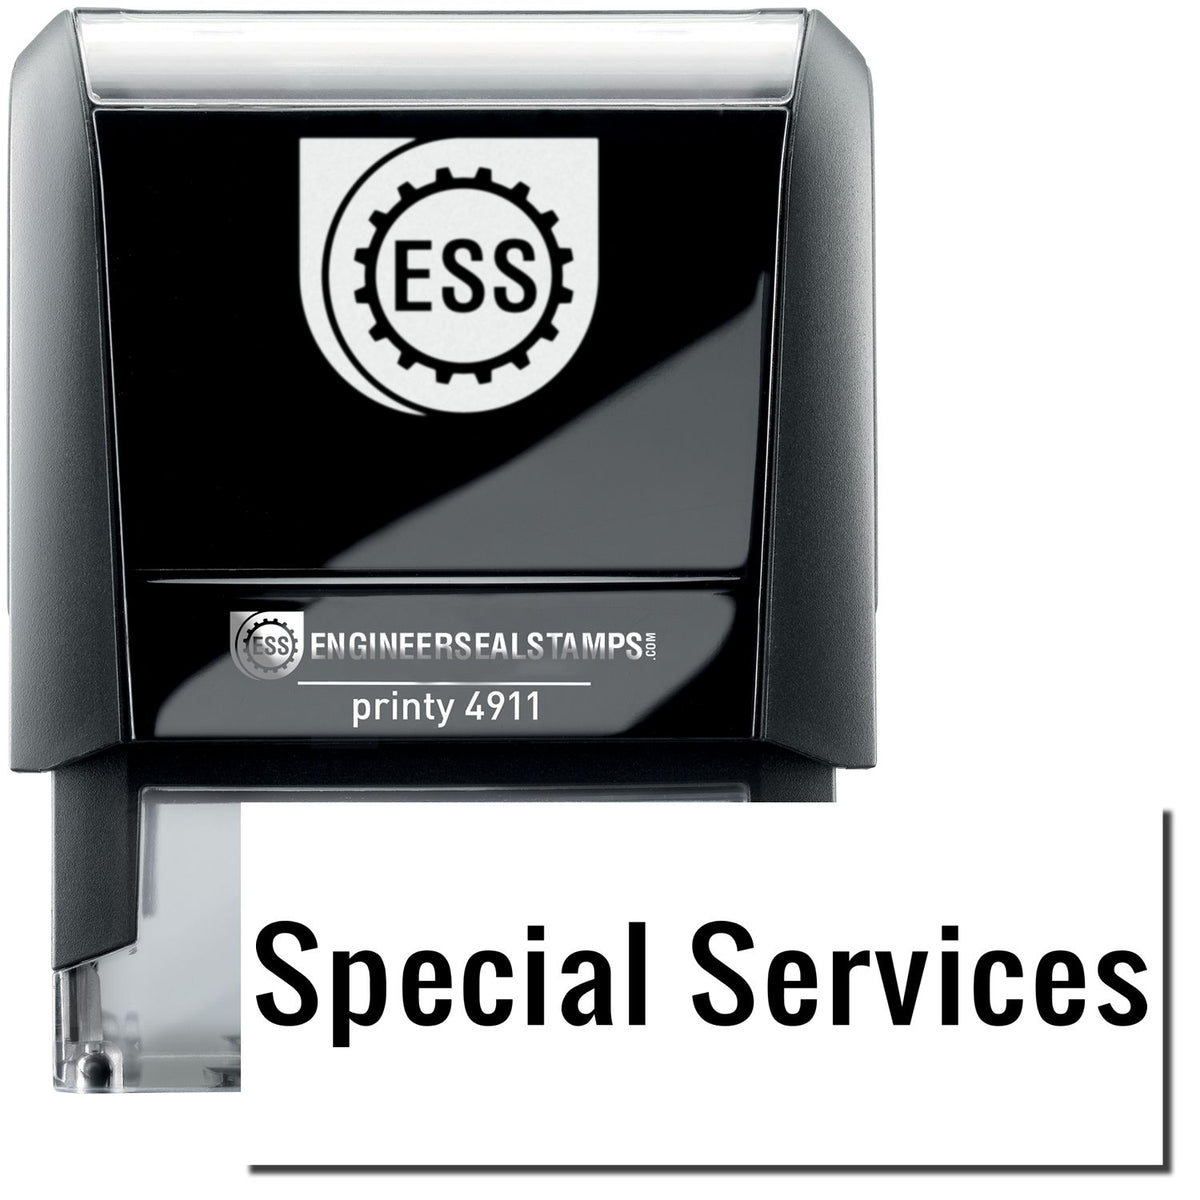 A self-inking stamp with a stamped image showing how the text &quot;Special Services&quot; is displayed after stamping.